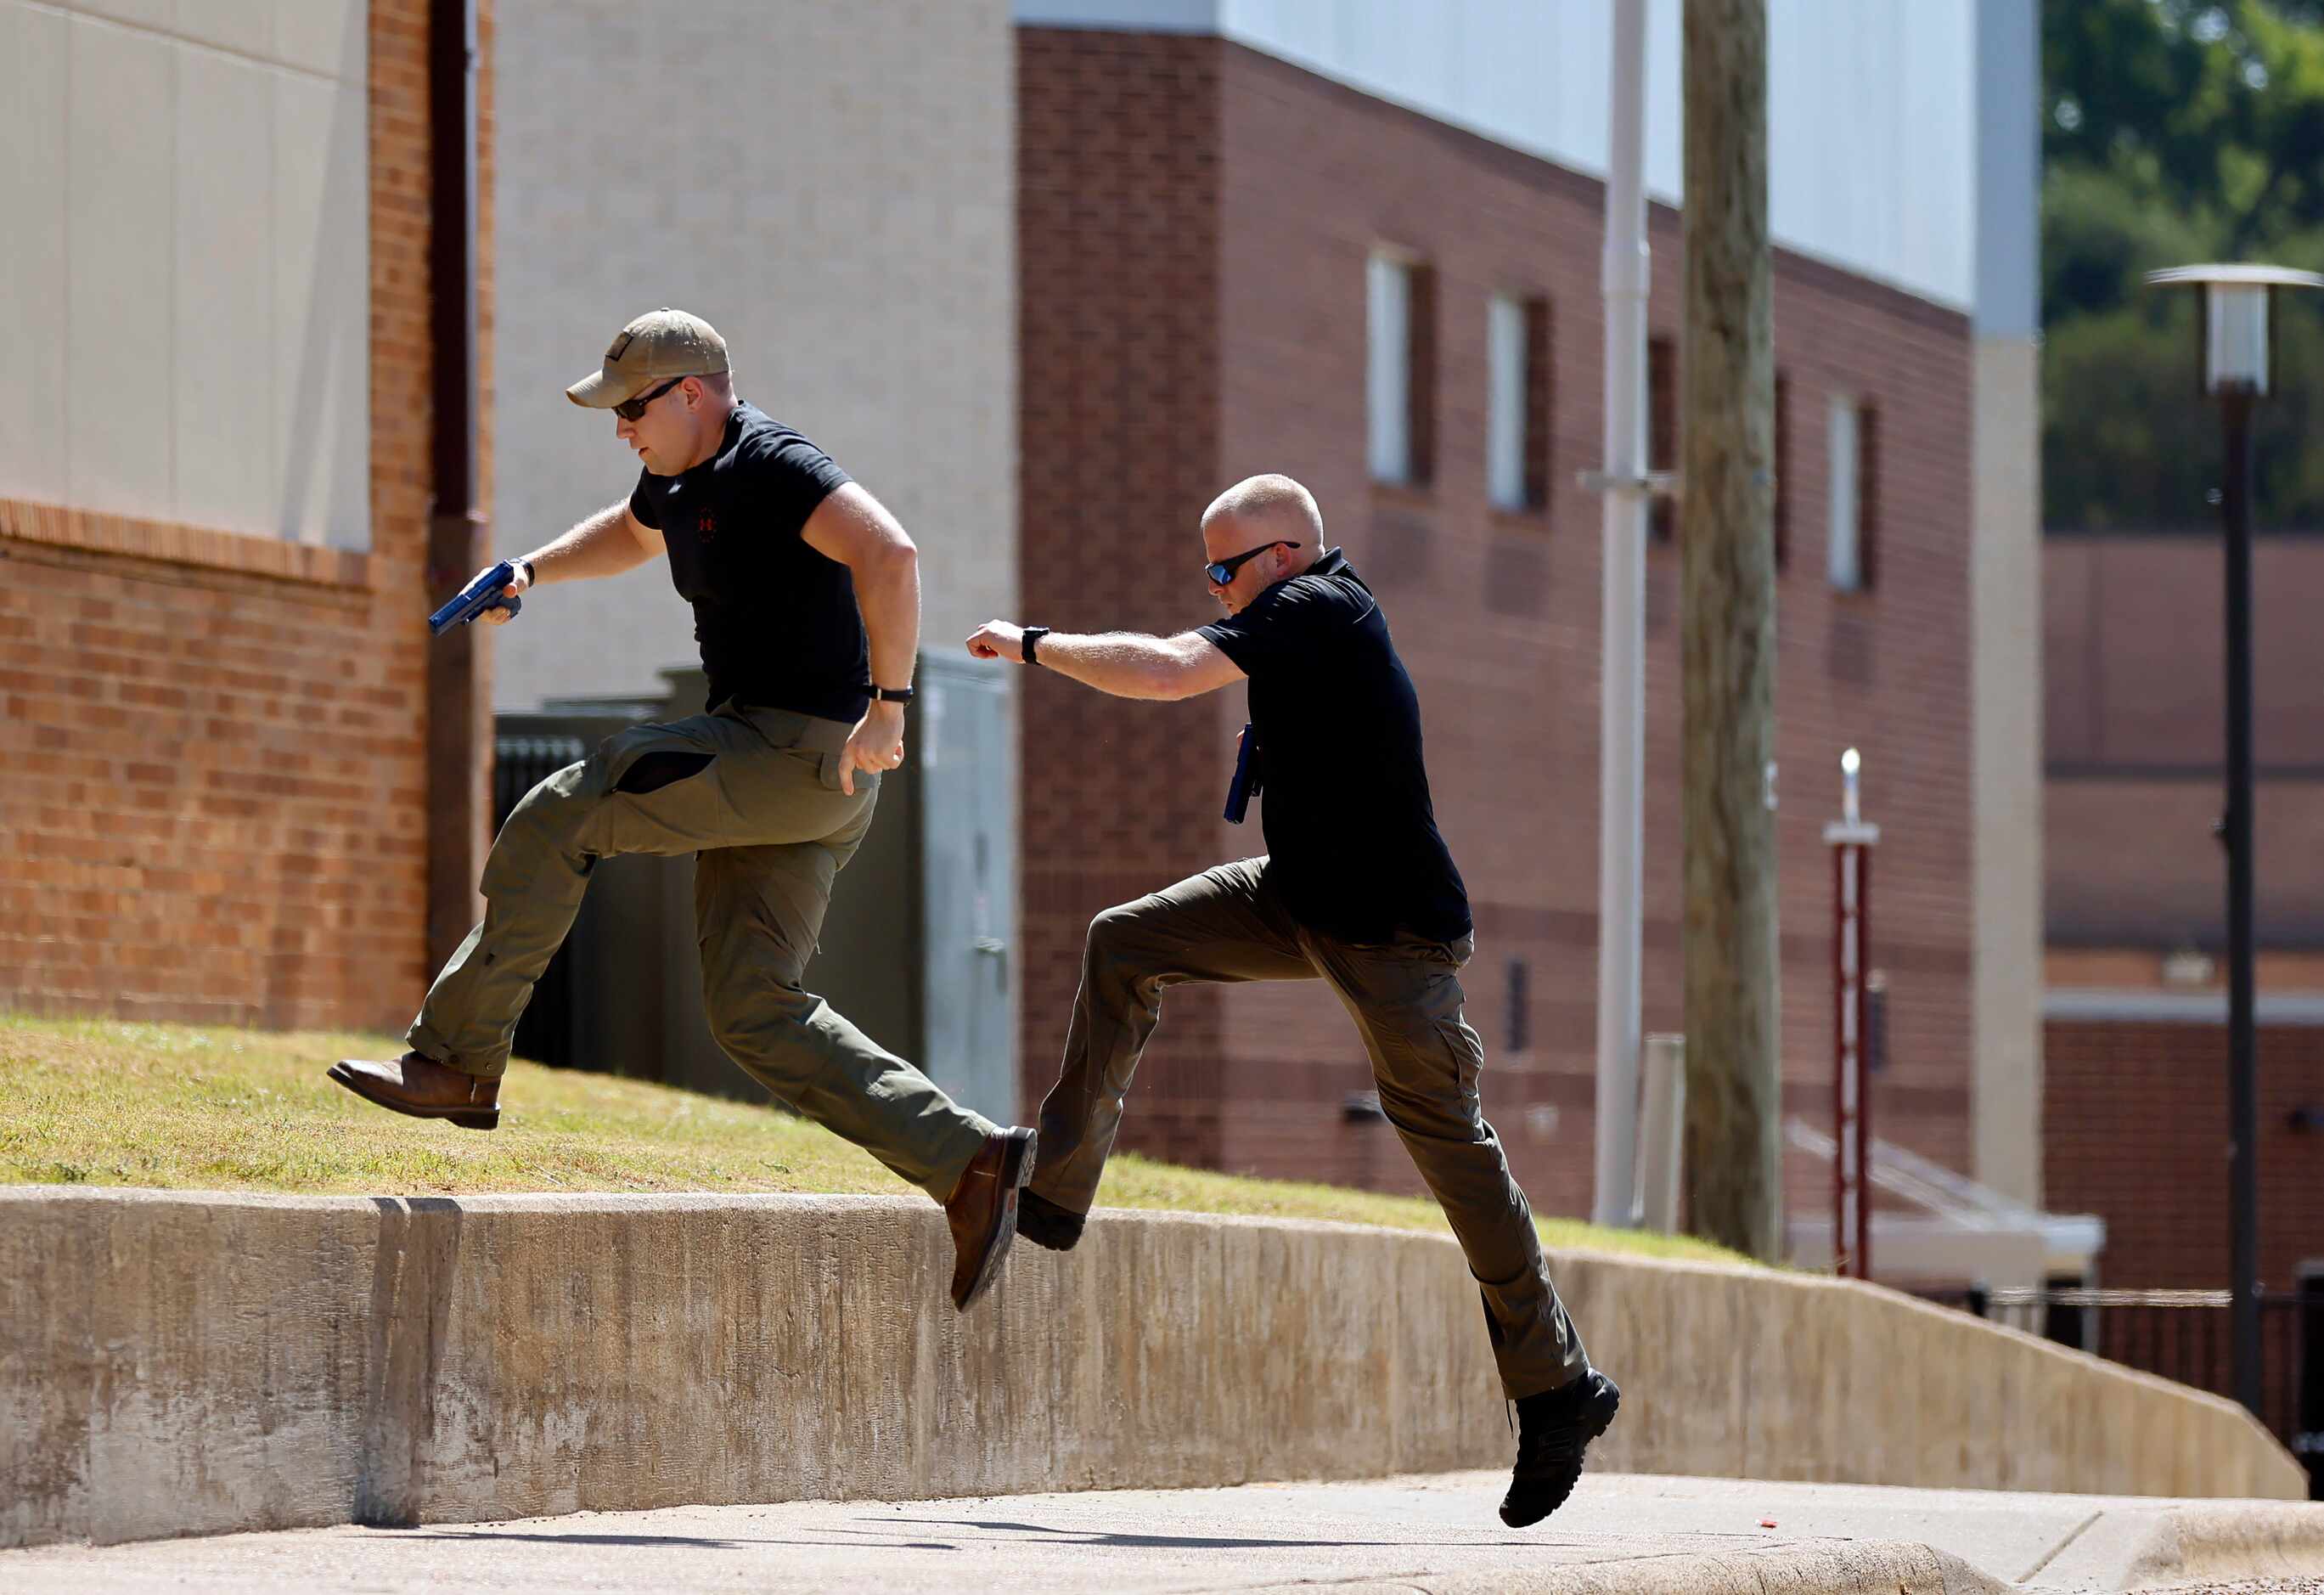 During a training session, Athens Police Officers Zachary Harris (left) and Adam Parkins...